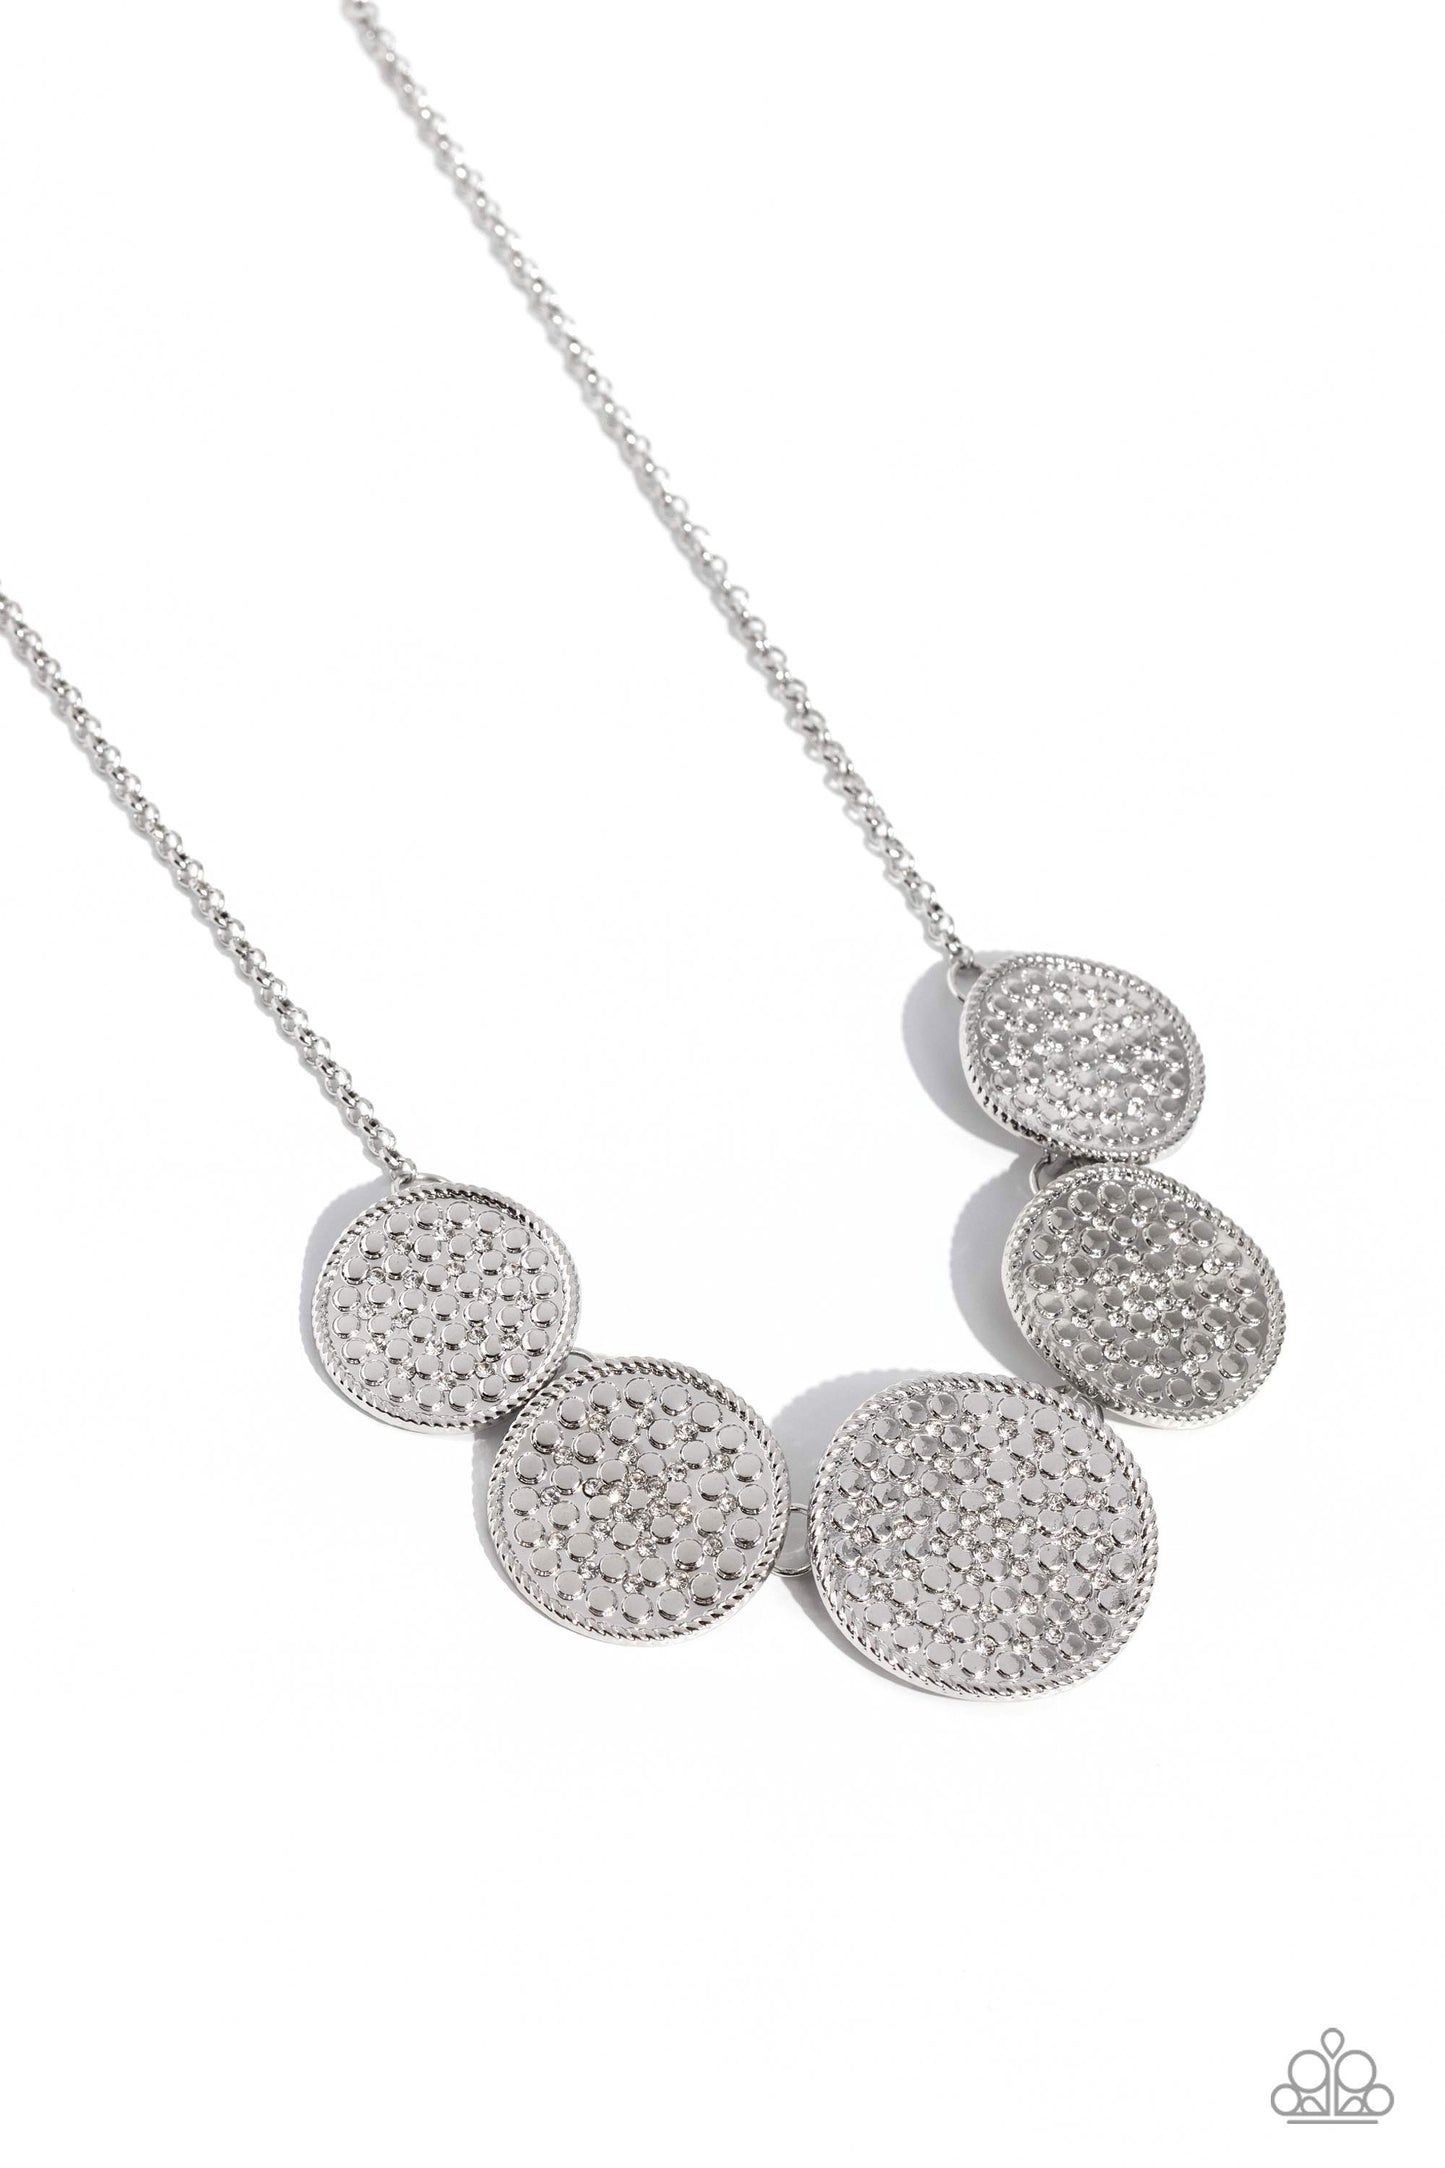 Paparazzi Accessories - Medaled Mosaic - White Necklaces embossed in a dotted, rhinestone encrusted motif, a refined collection of warped silver discs royally links below the collar for an artisan inspired fashion. Features an adjustable clasp closure.  Sold as one individual necklace. Includes one pair of matching earrings.